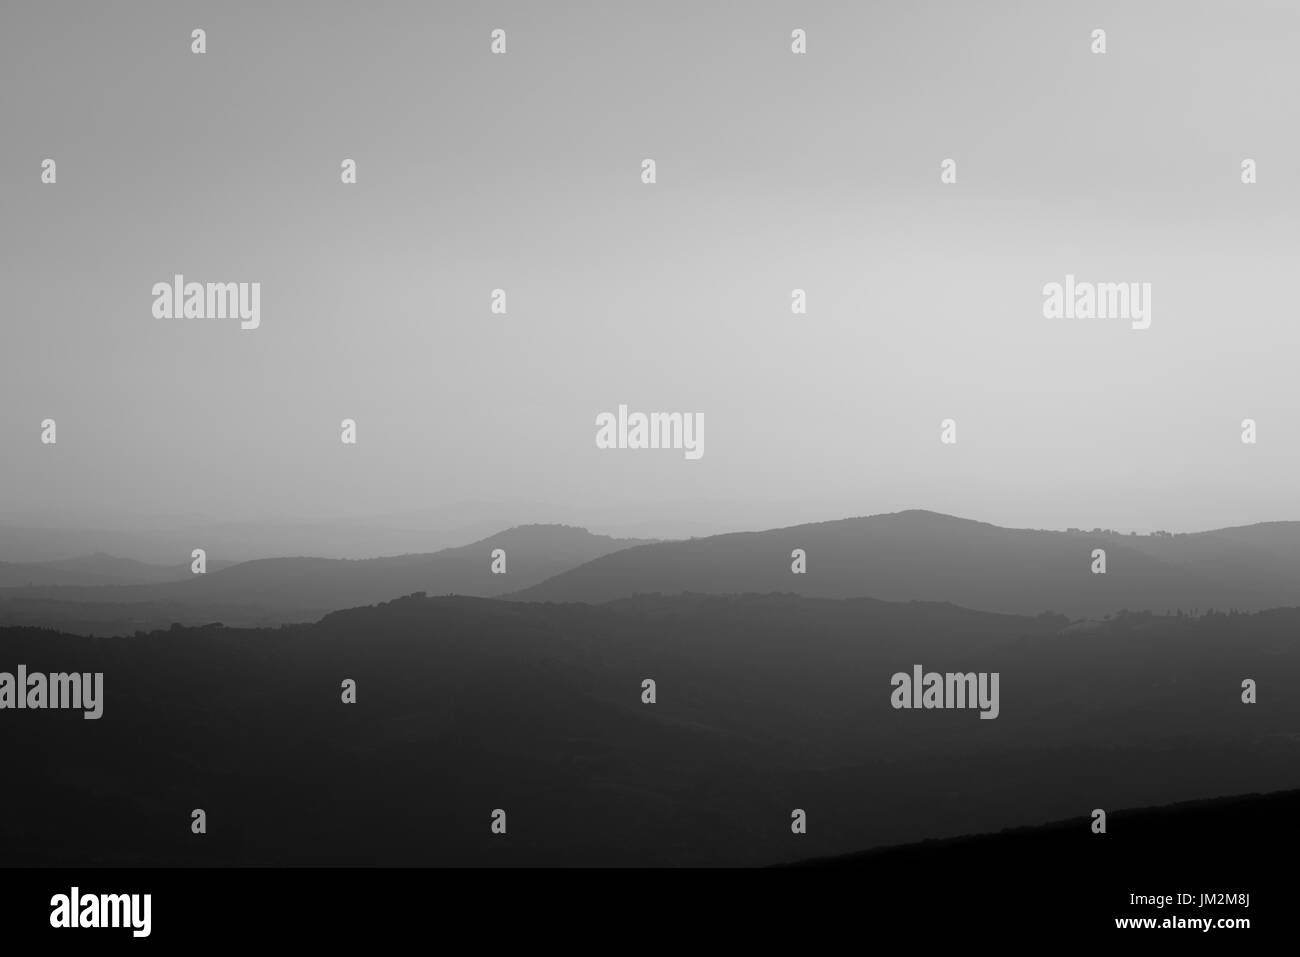 Silhouette layers of hills at sunset with fog. Black and white photo. Stock Photo